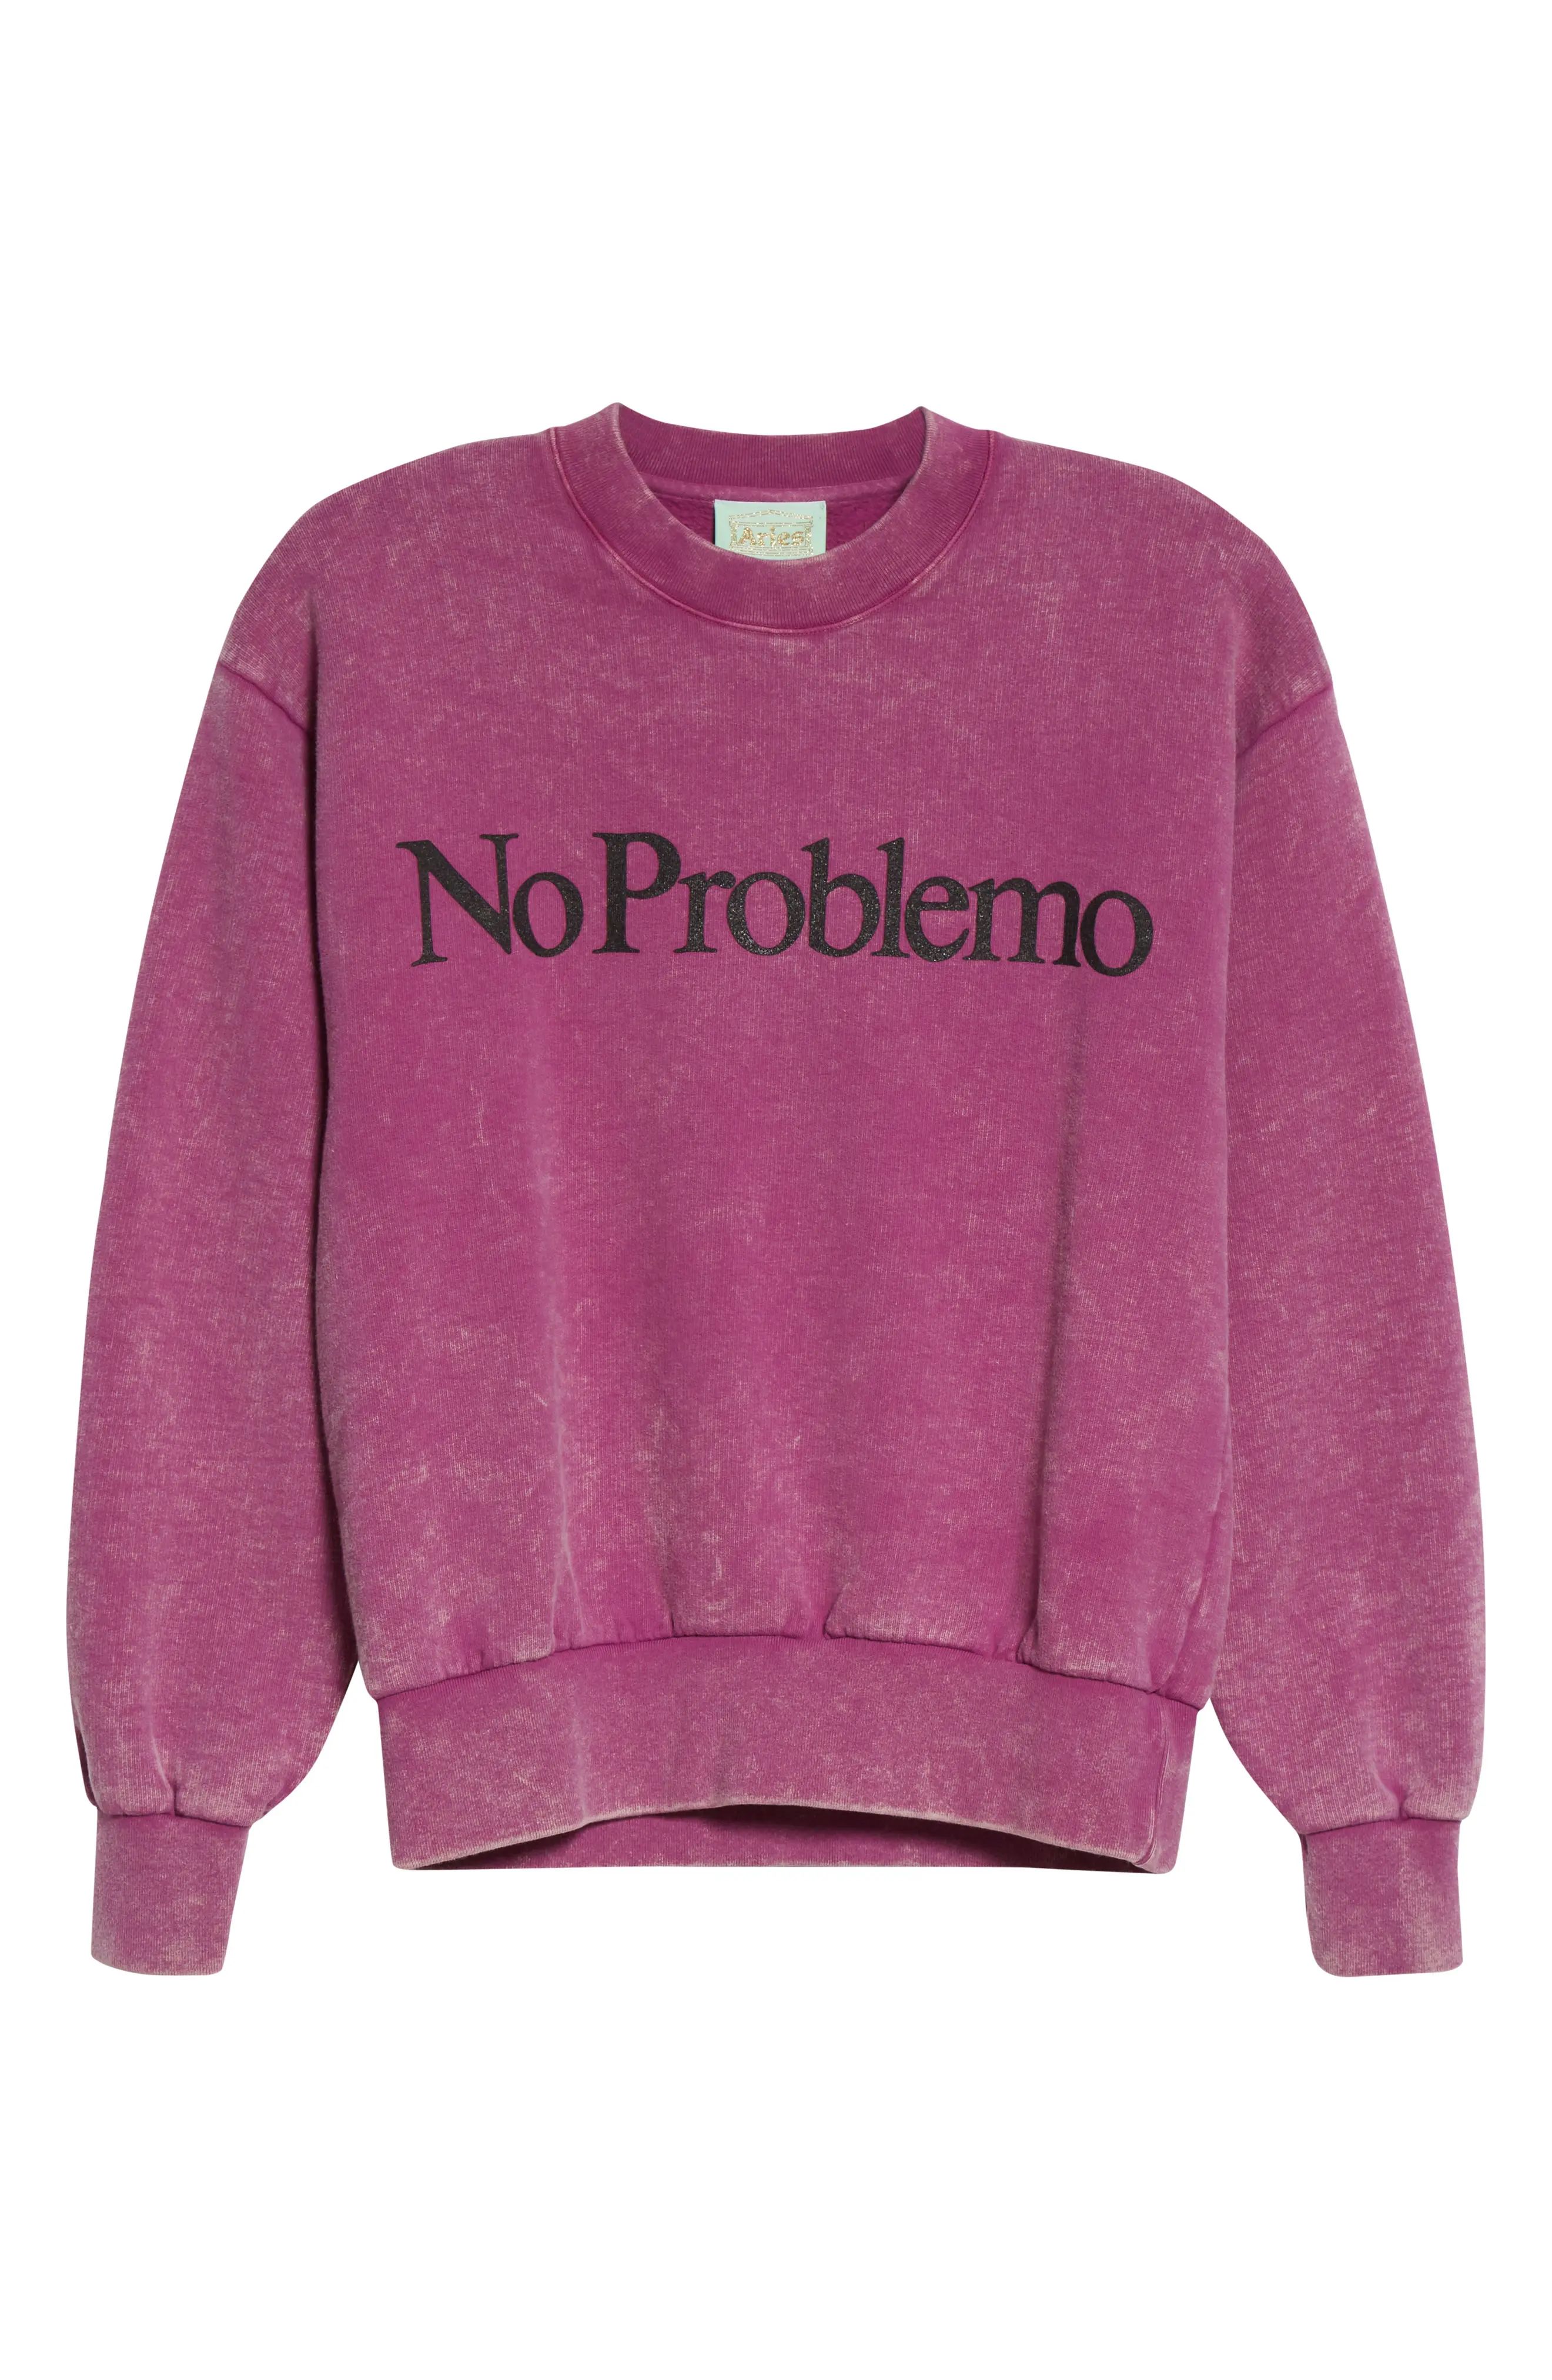 Aries No Problemo Graphic Cotton Sweatshirt in Aster at Nordstrom, Size Large | Nordstrom